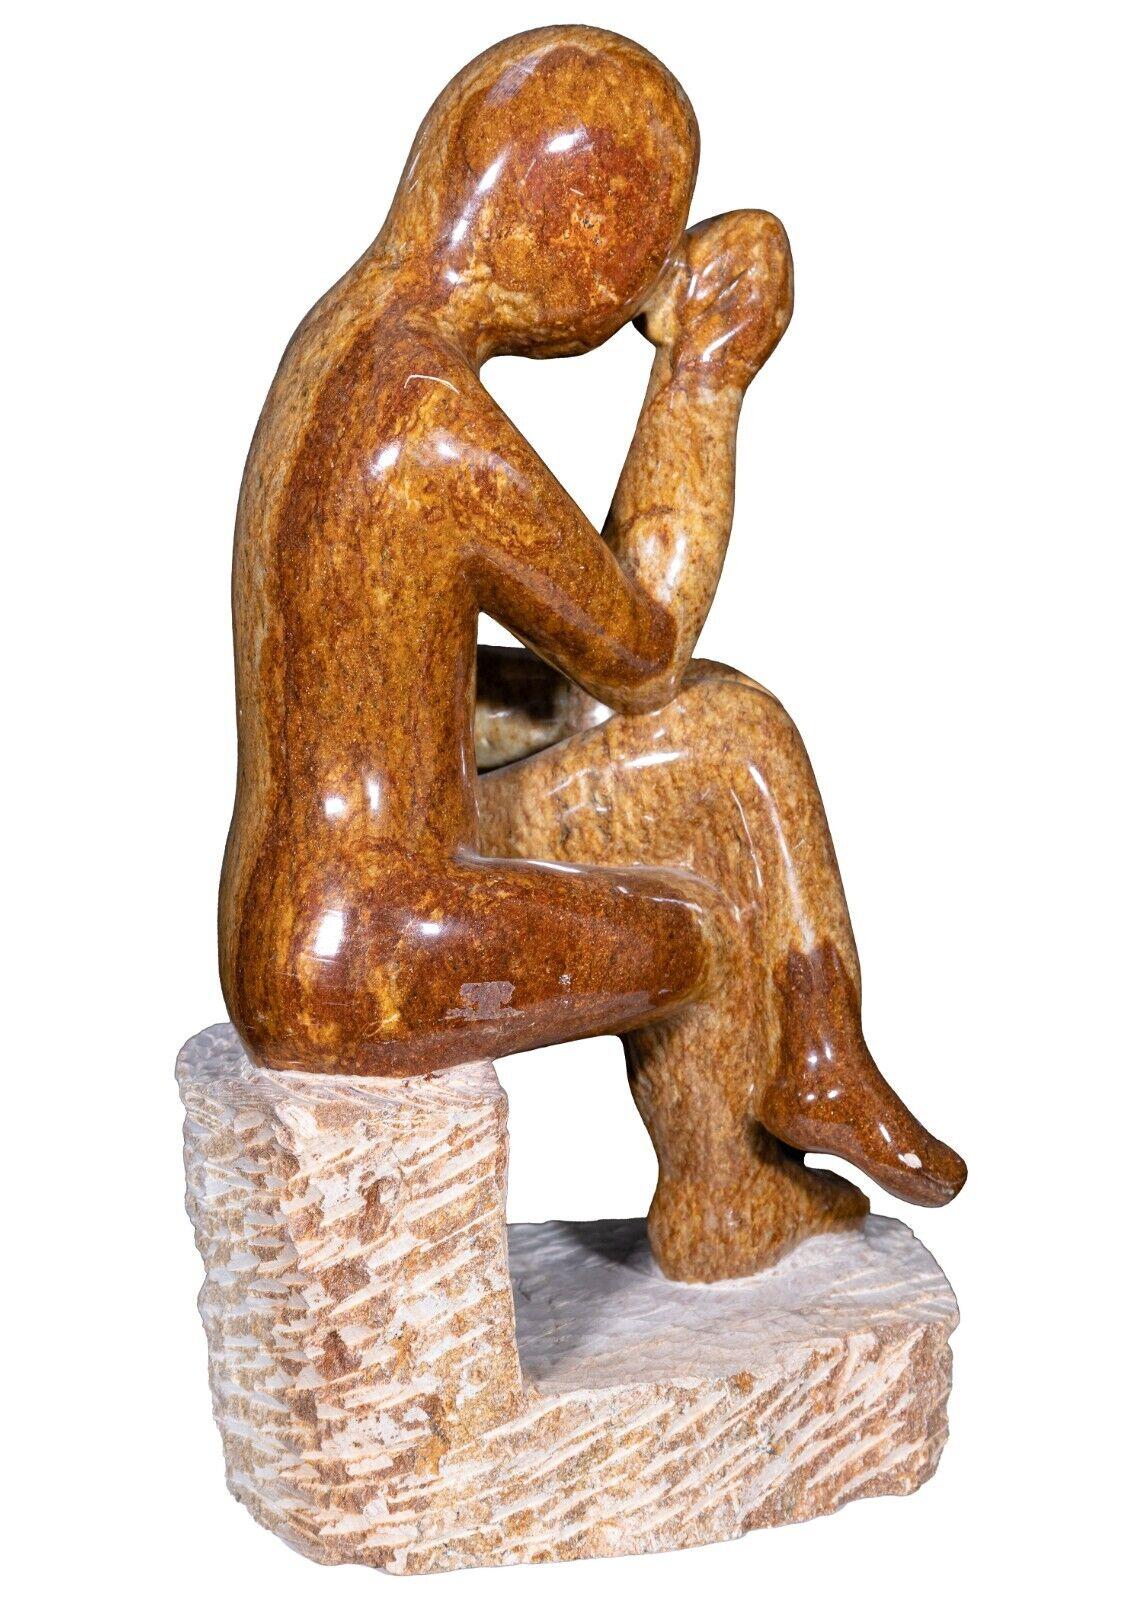 A glass soapstone figurine. This gorgeous sculpture depicts a figure sitting while in deep contemplation. This piece is made from a stunning polished brown soapstone and sits on a separate stone base. The gradations in the soapstone provide for a